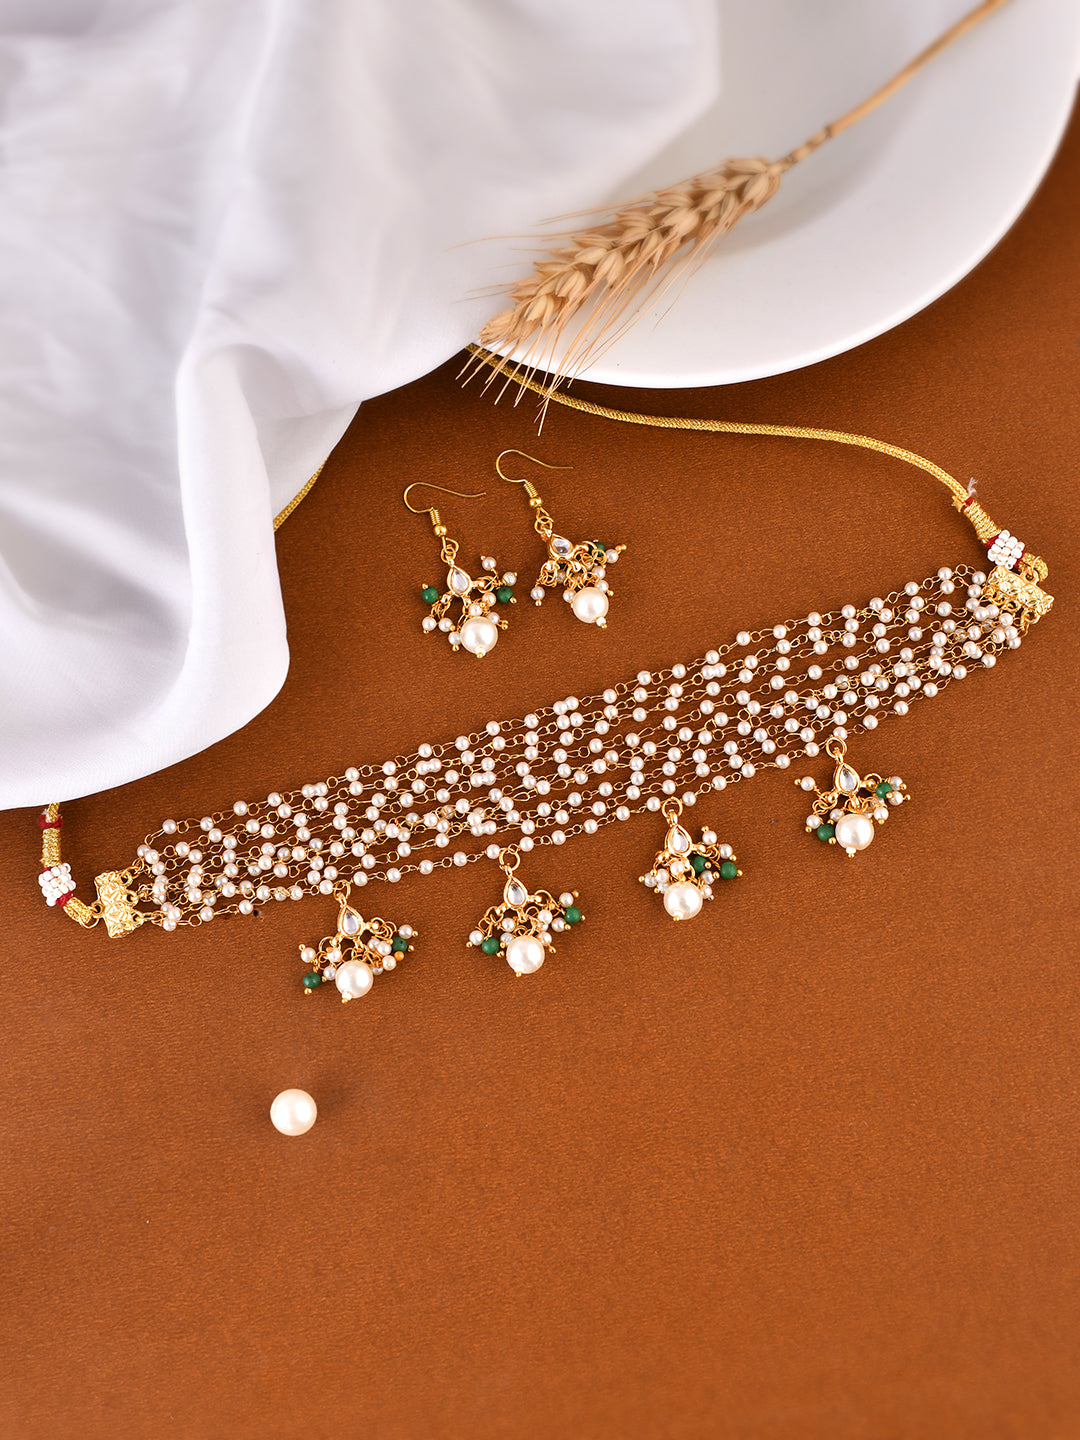 Gold tone perls jewellery set with earrings